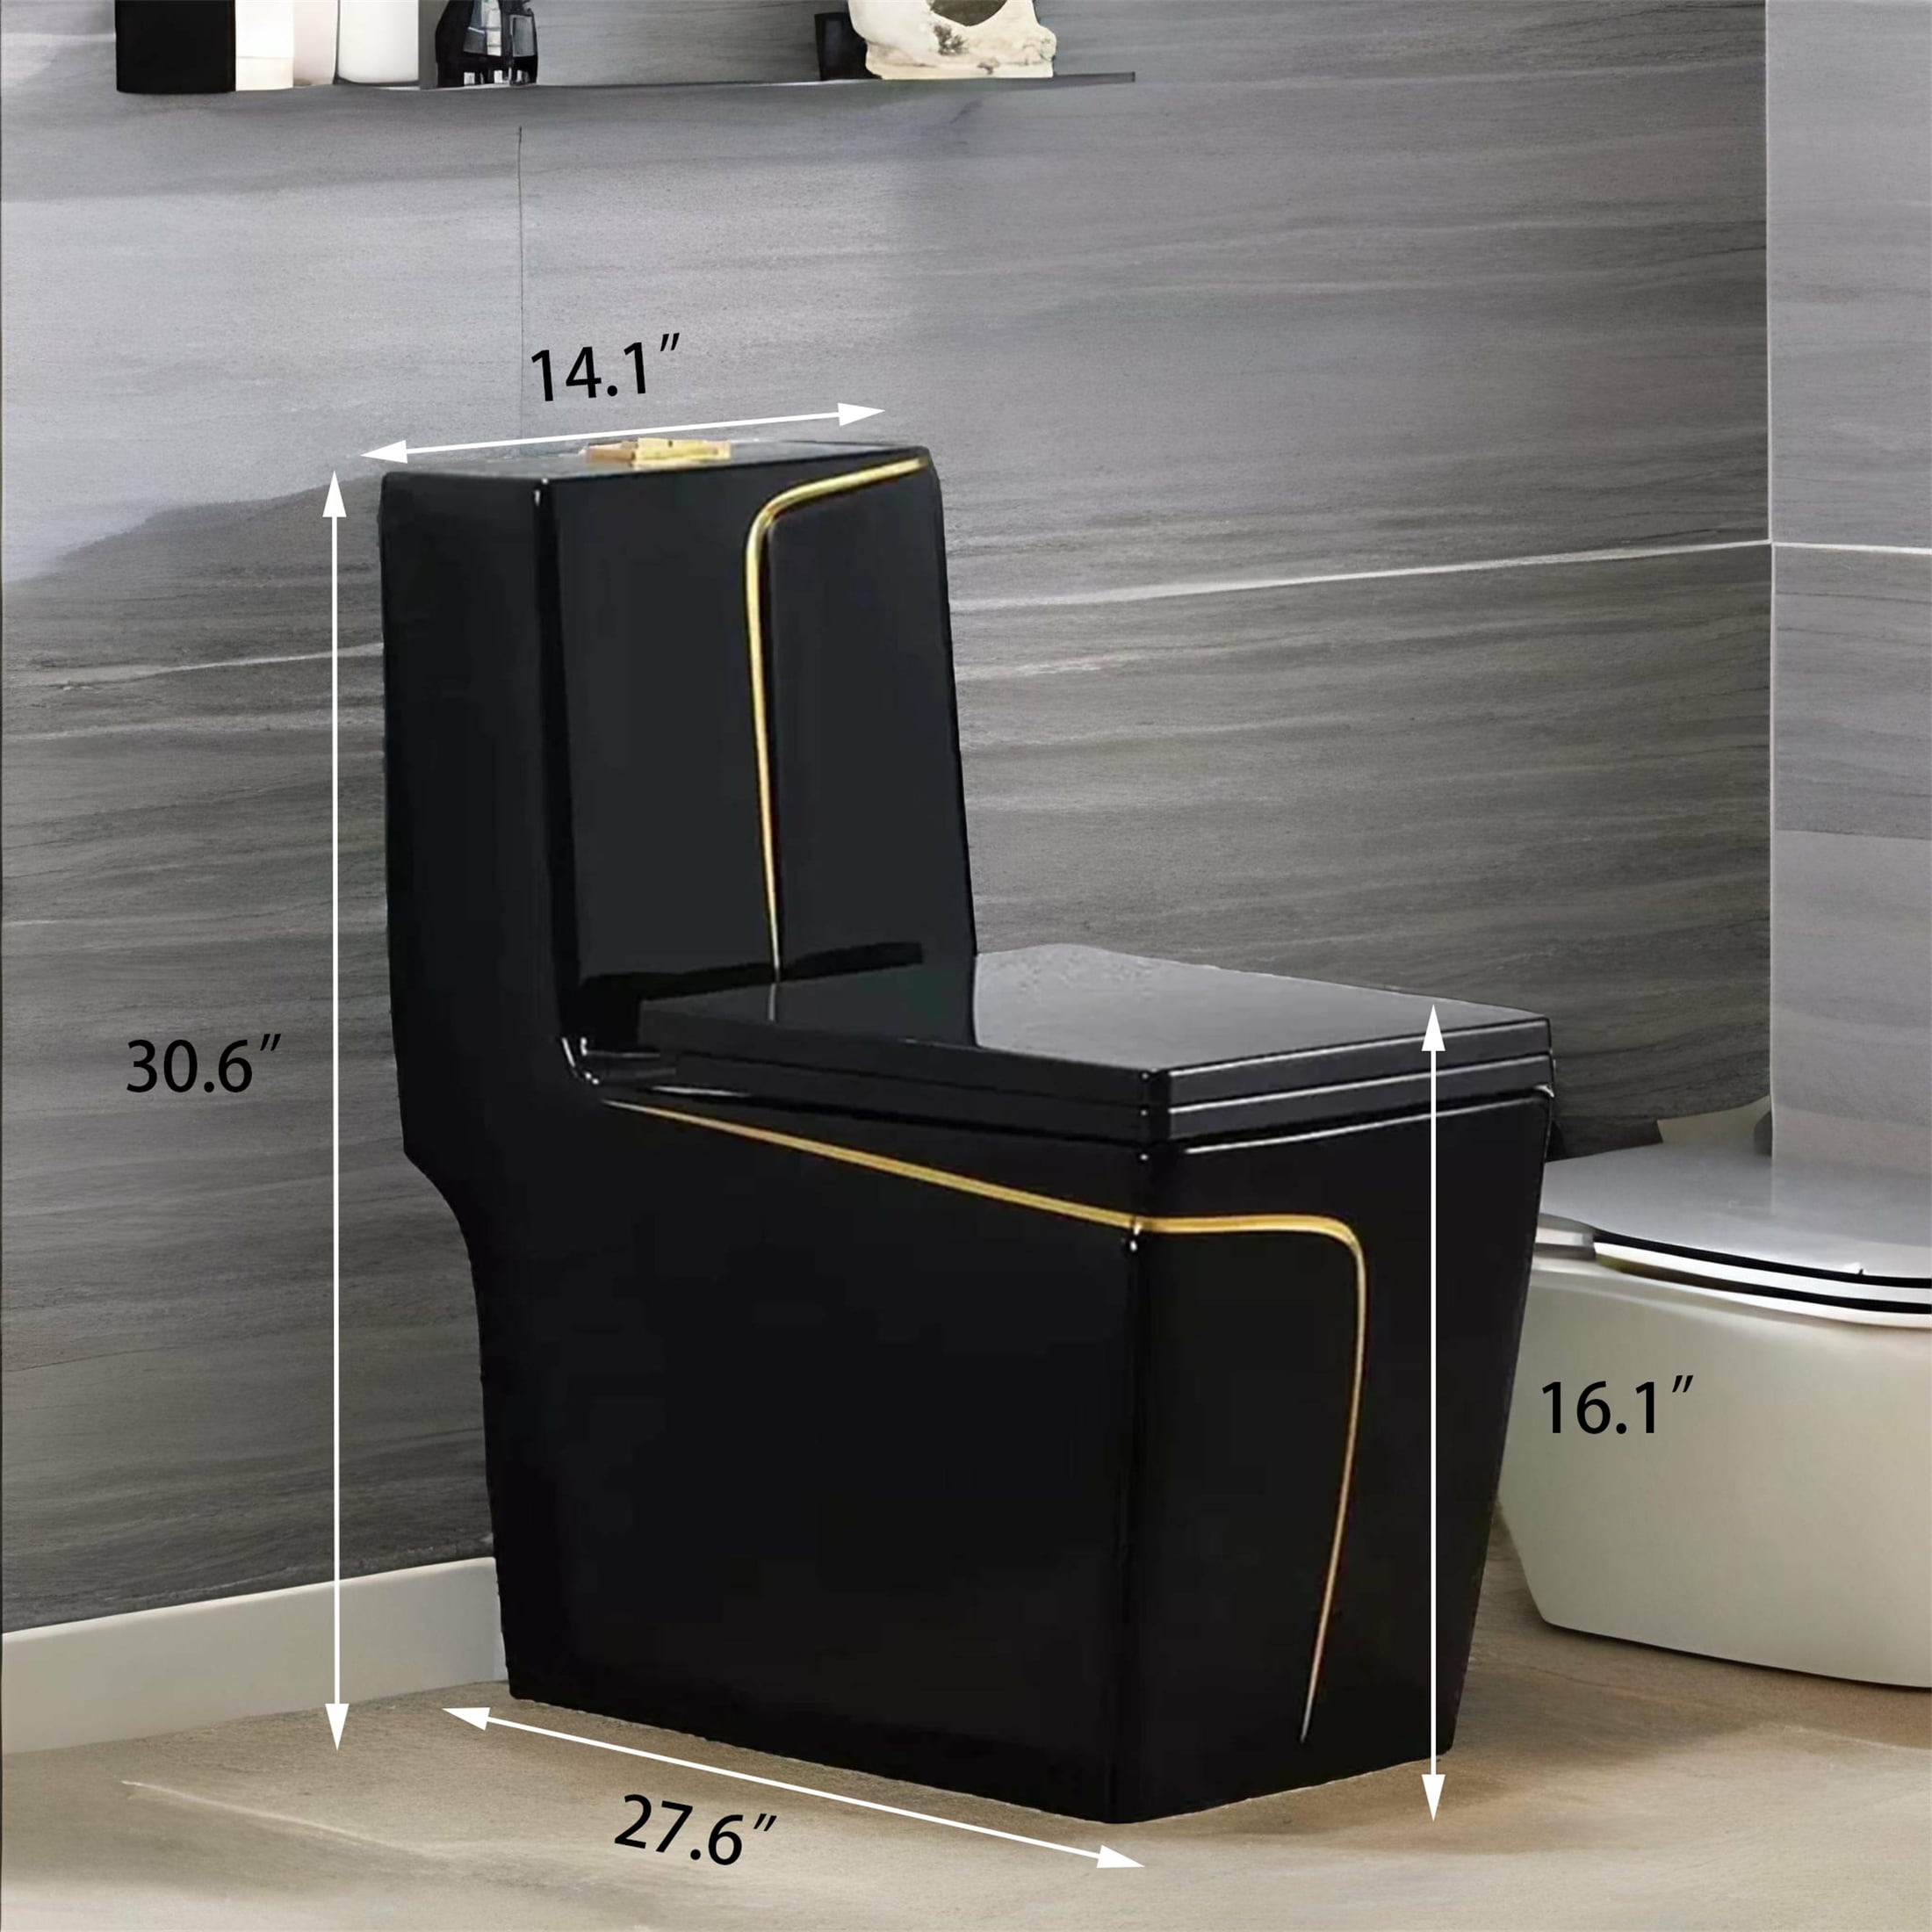 https://ak1.ostkcdn.com/images/products/is/images/direct/a12dc62331d171c9ef424be5b2d0e51615140936/Black-Ceramic-One-Piece-Toilet-with-Seat.jpg